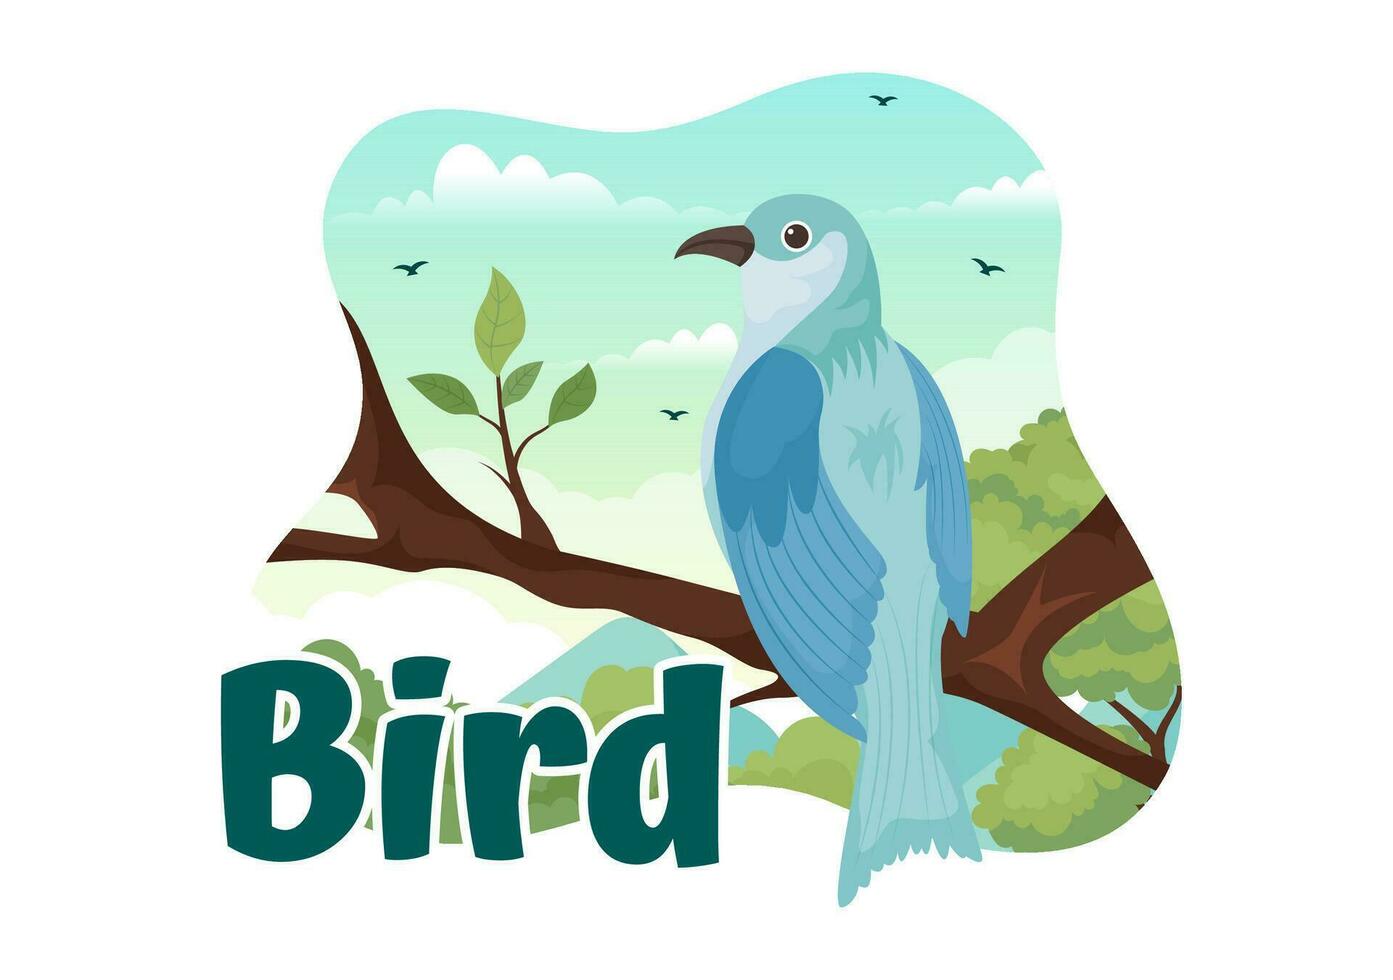 Bird Animal Vector Illustration with Birds on Tree Roots and Sky as Background in Flat Cartoon Style Design Template